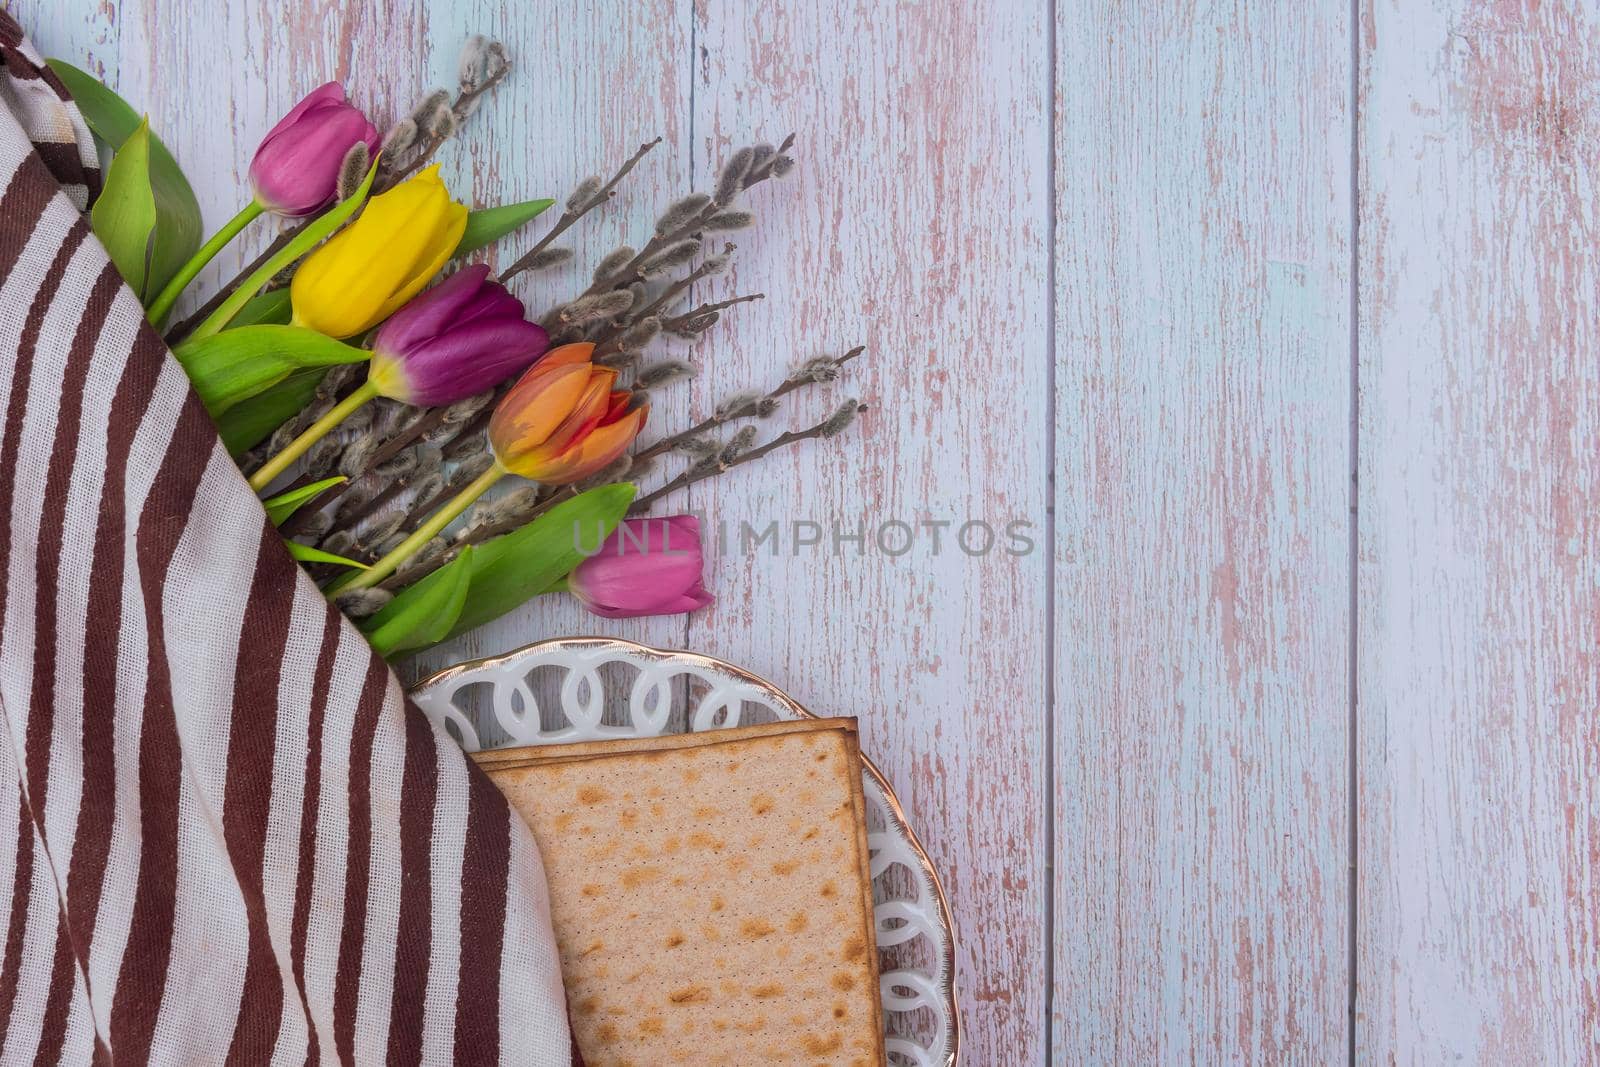 Passover Jewish holiday on flowers and matzah the wood table